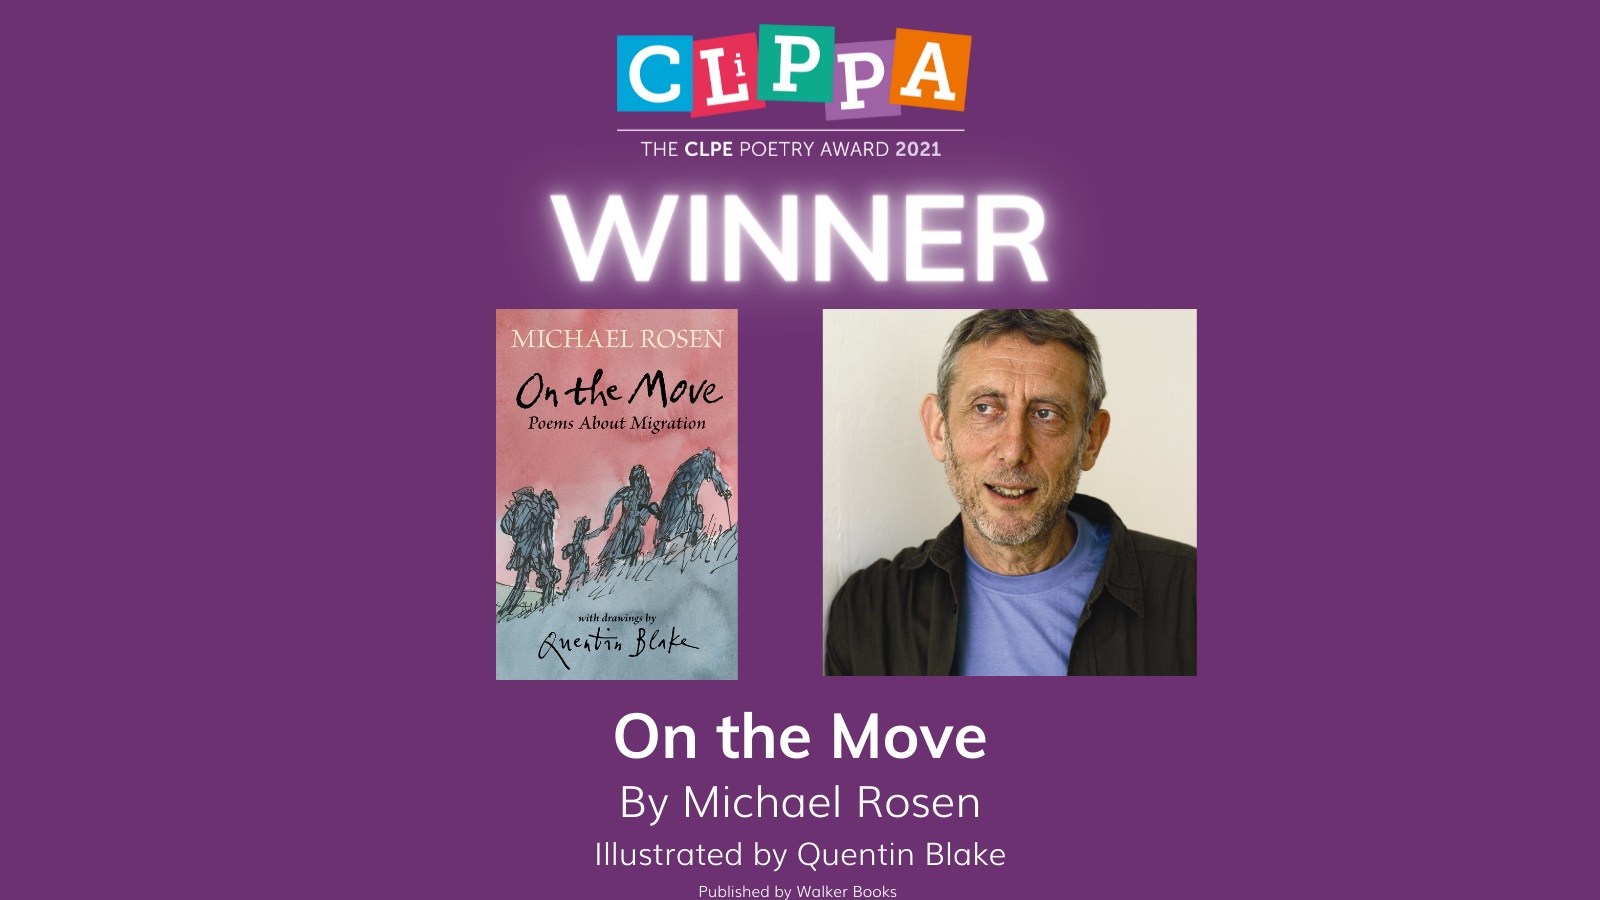 Classroom resources to shadow the CLiPPA poetry award